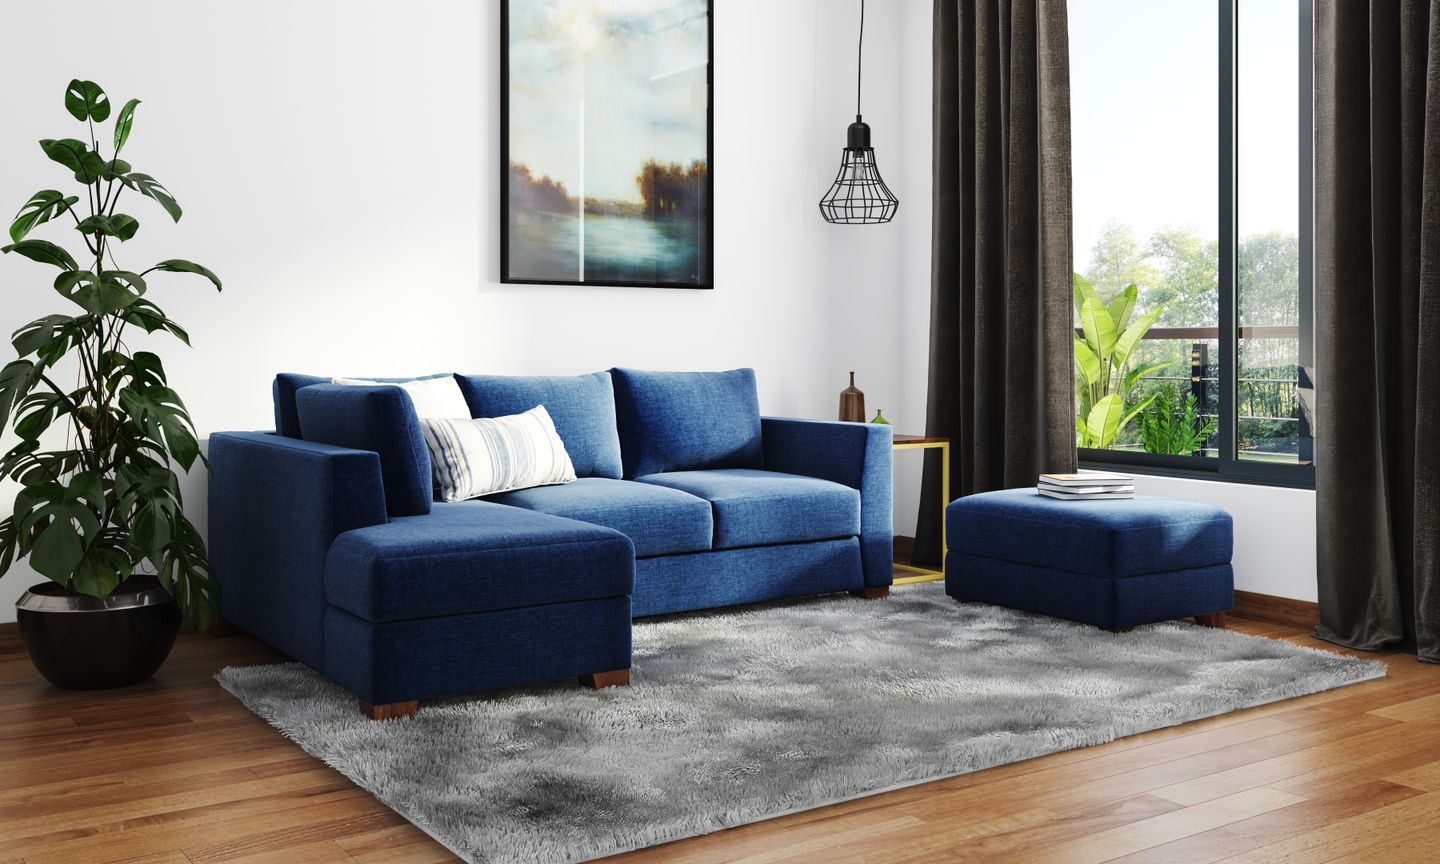 Eclectic Living Room with Royal Blue Sofa - Livspace